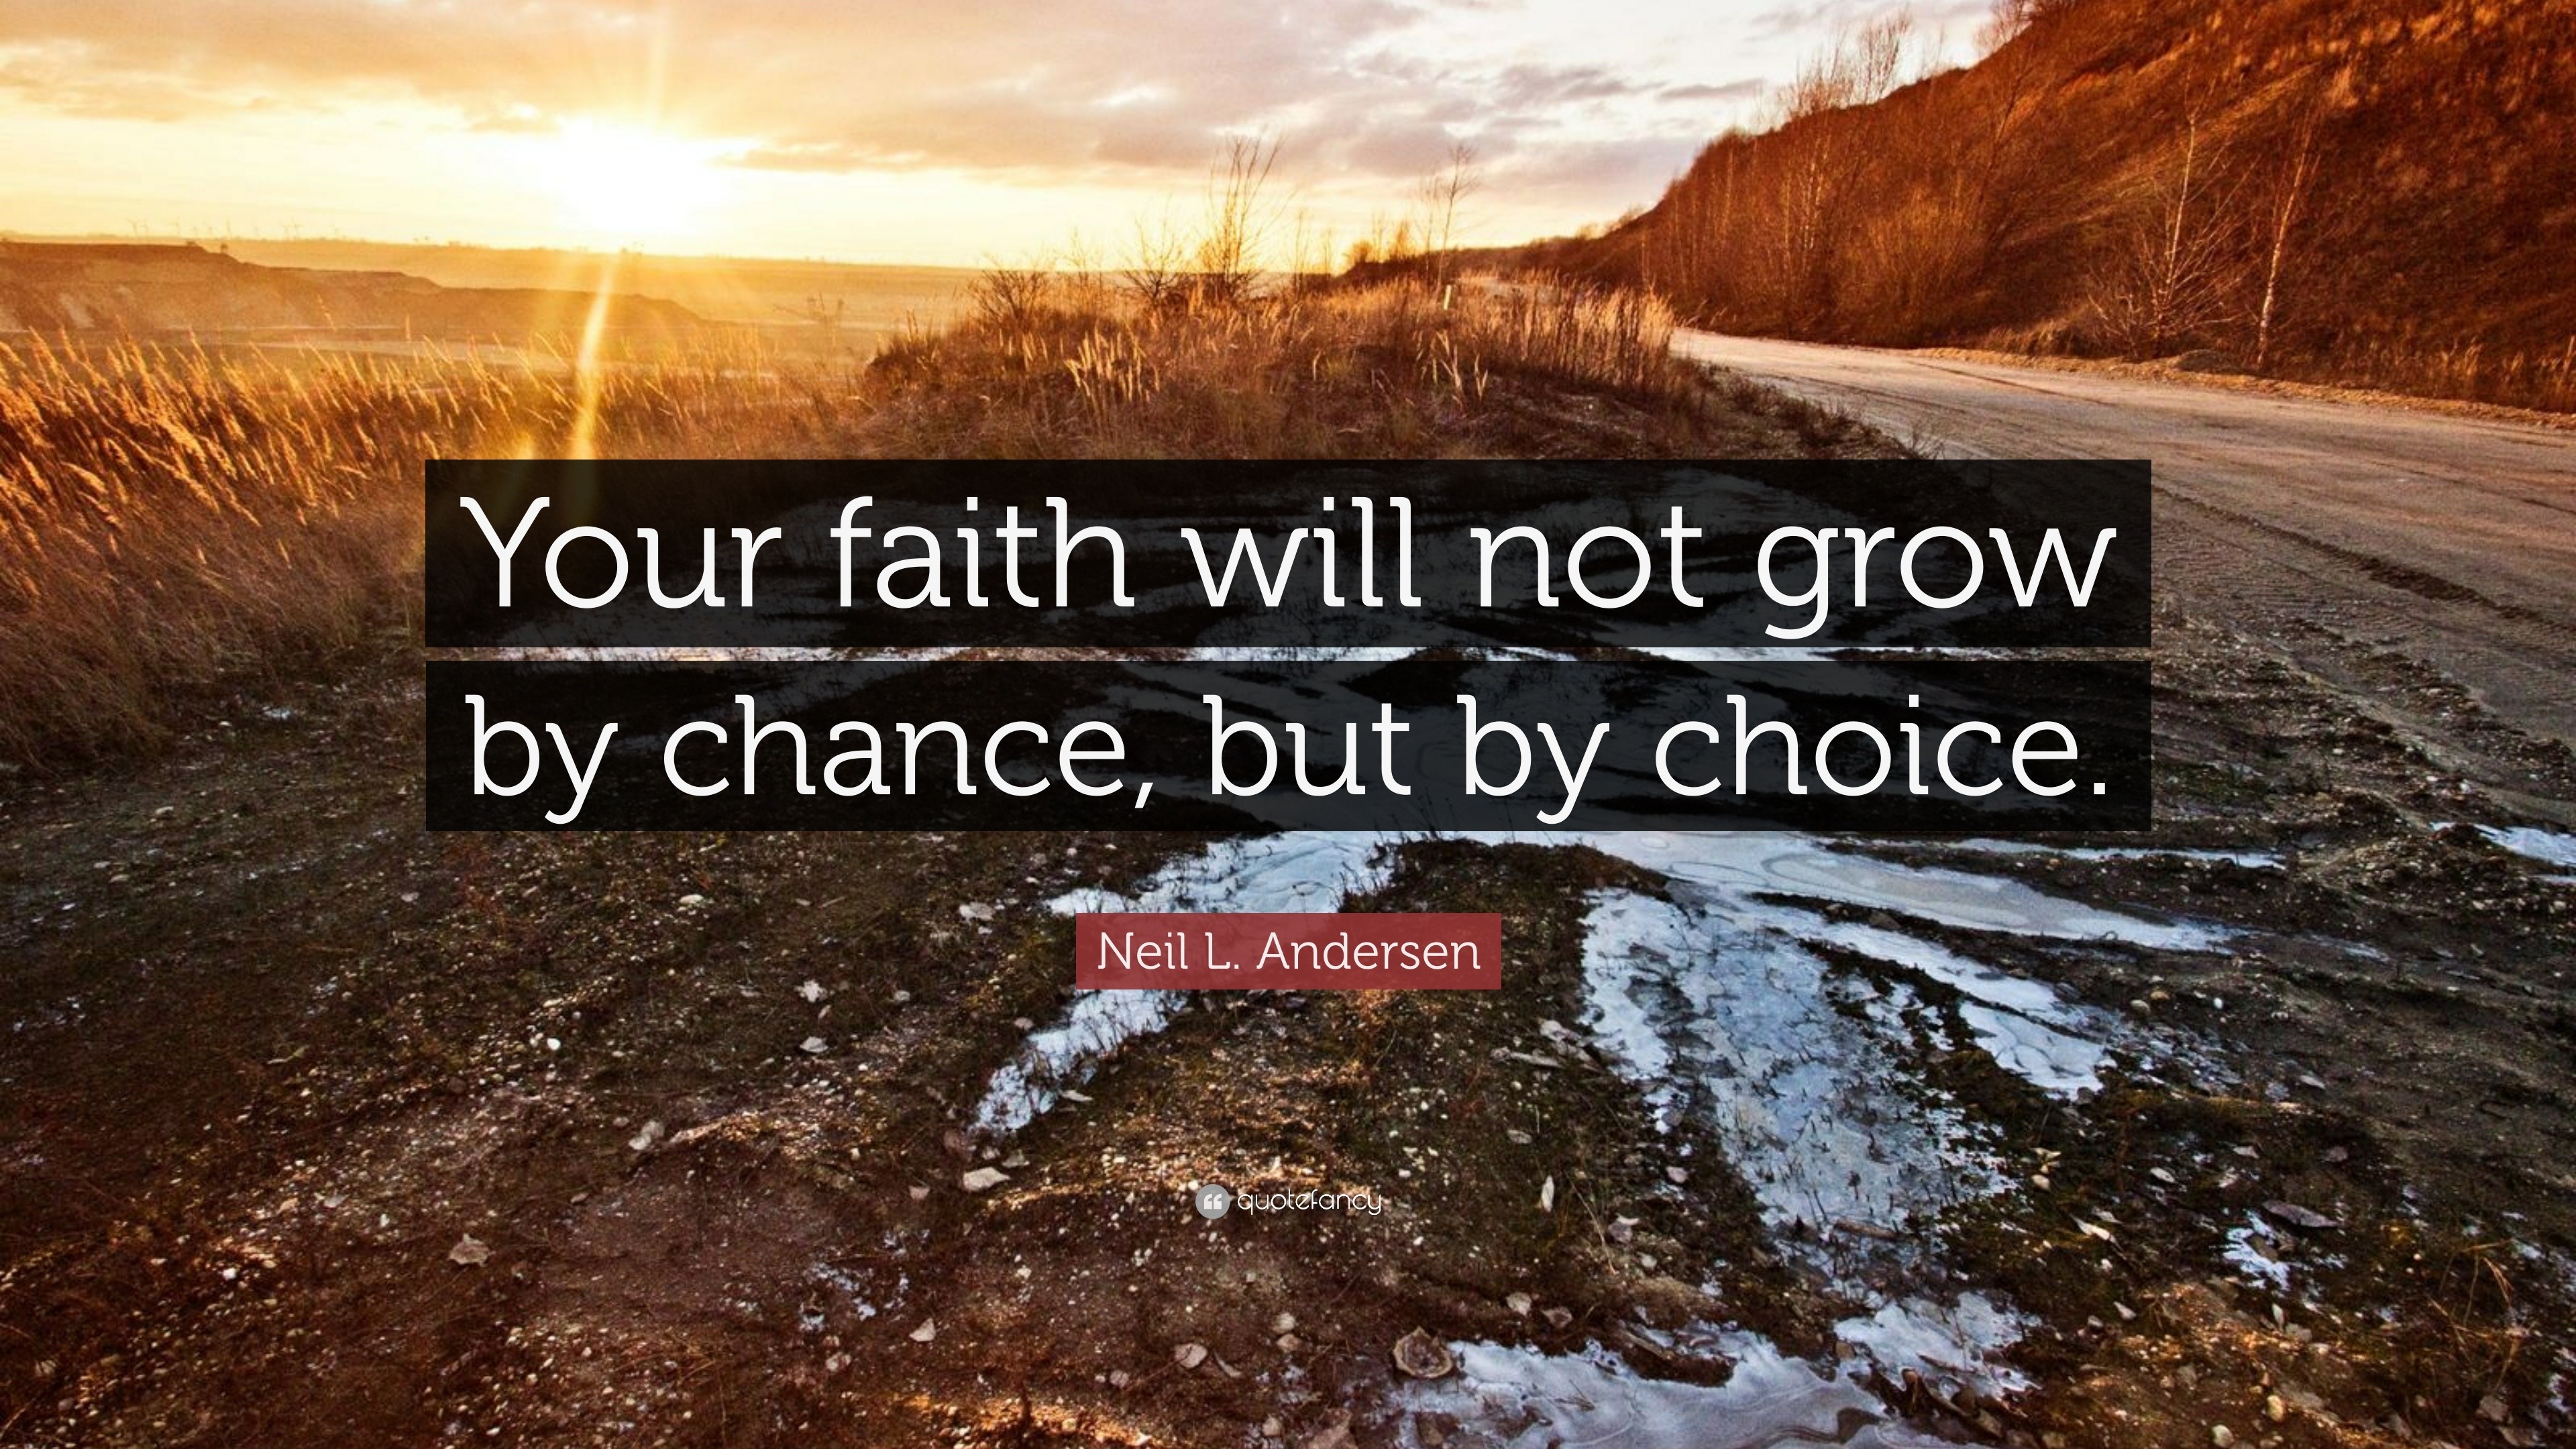 Neil L Andersen Quote Your Faith Will Not Grow By Chance But By Choice